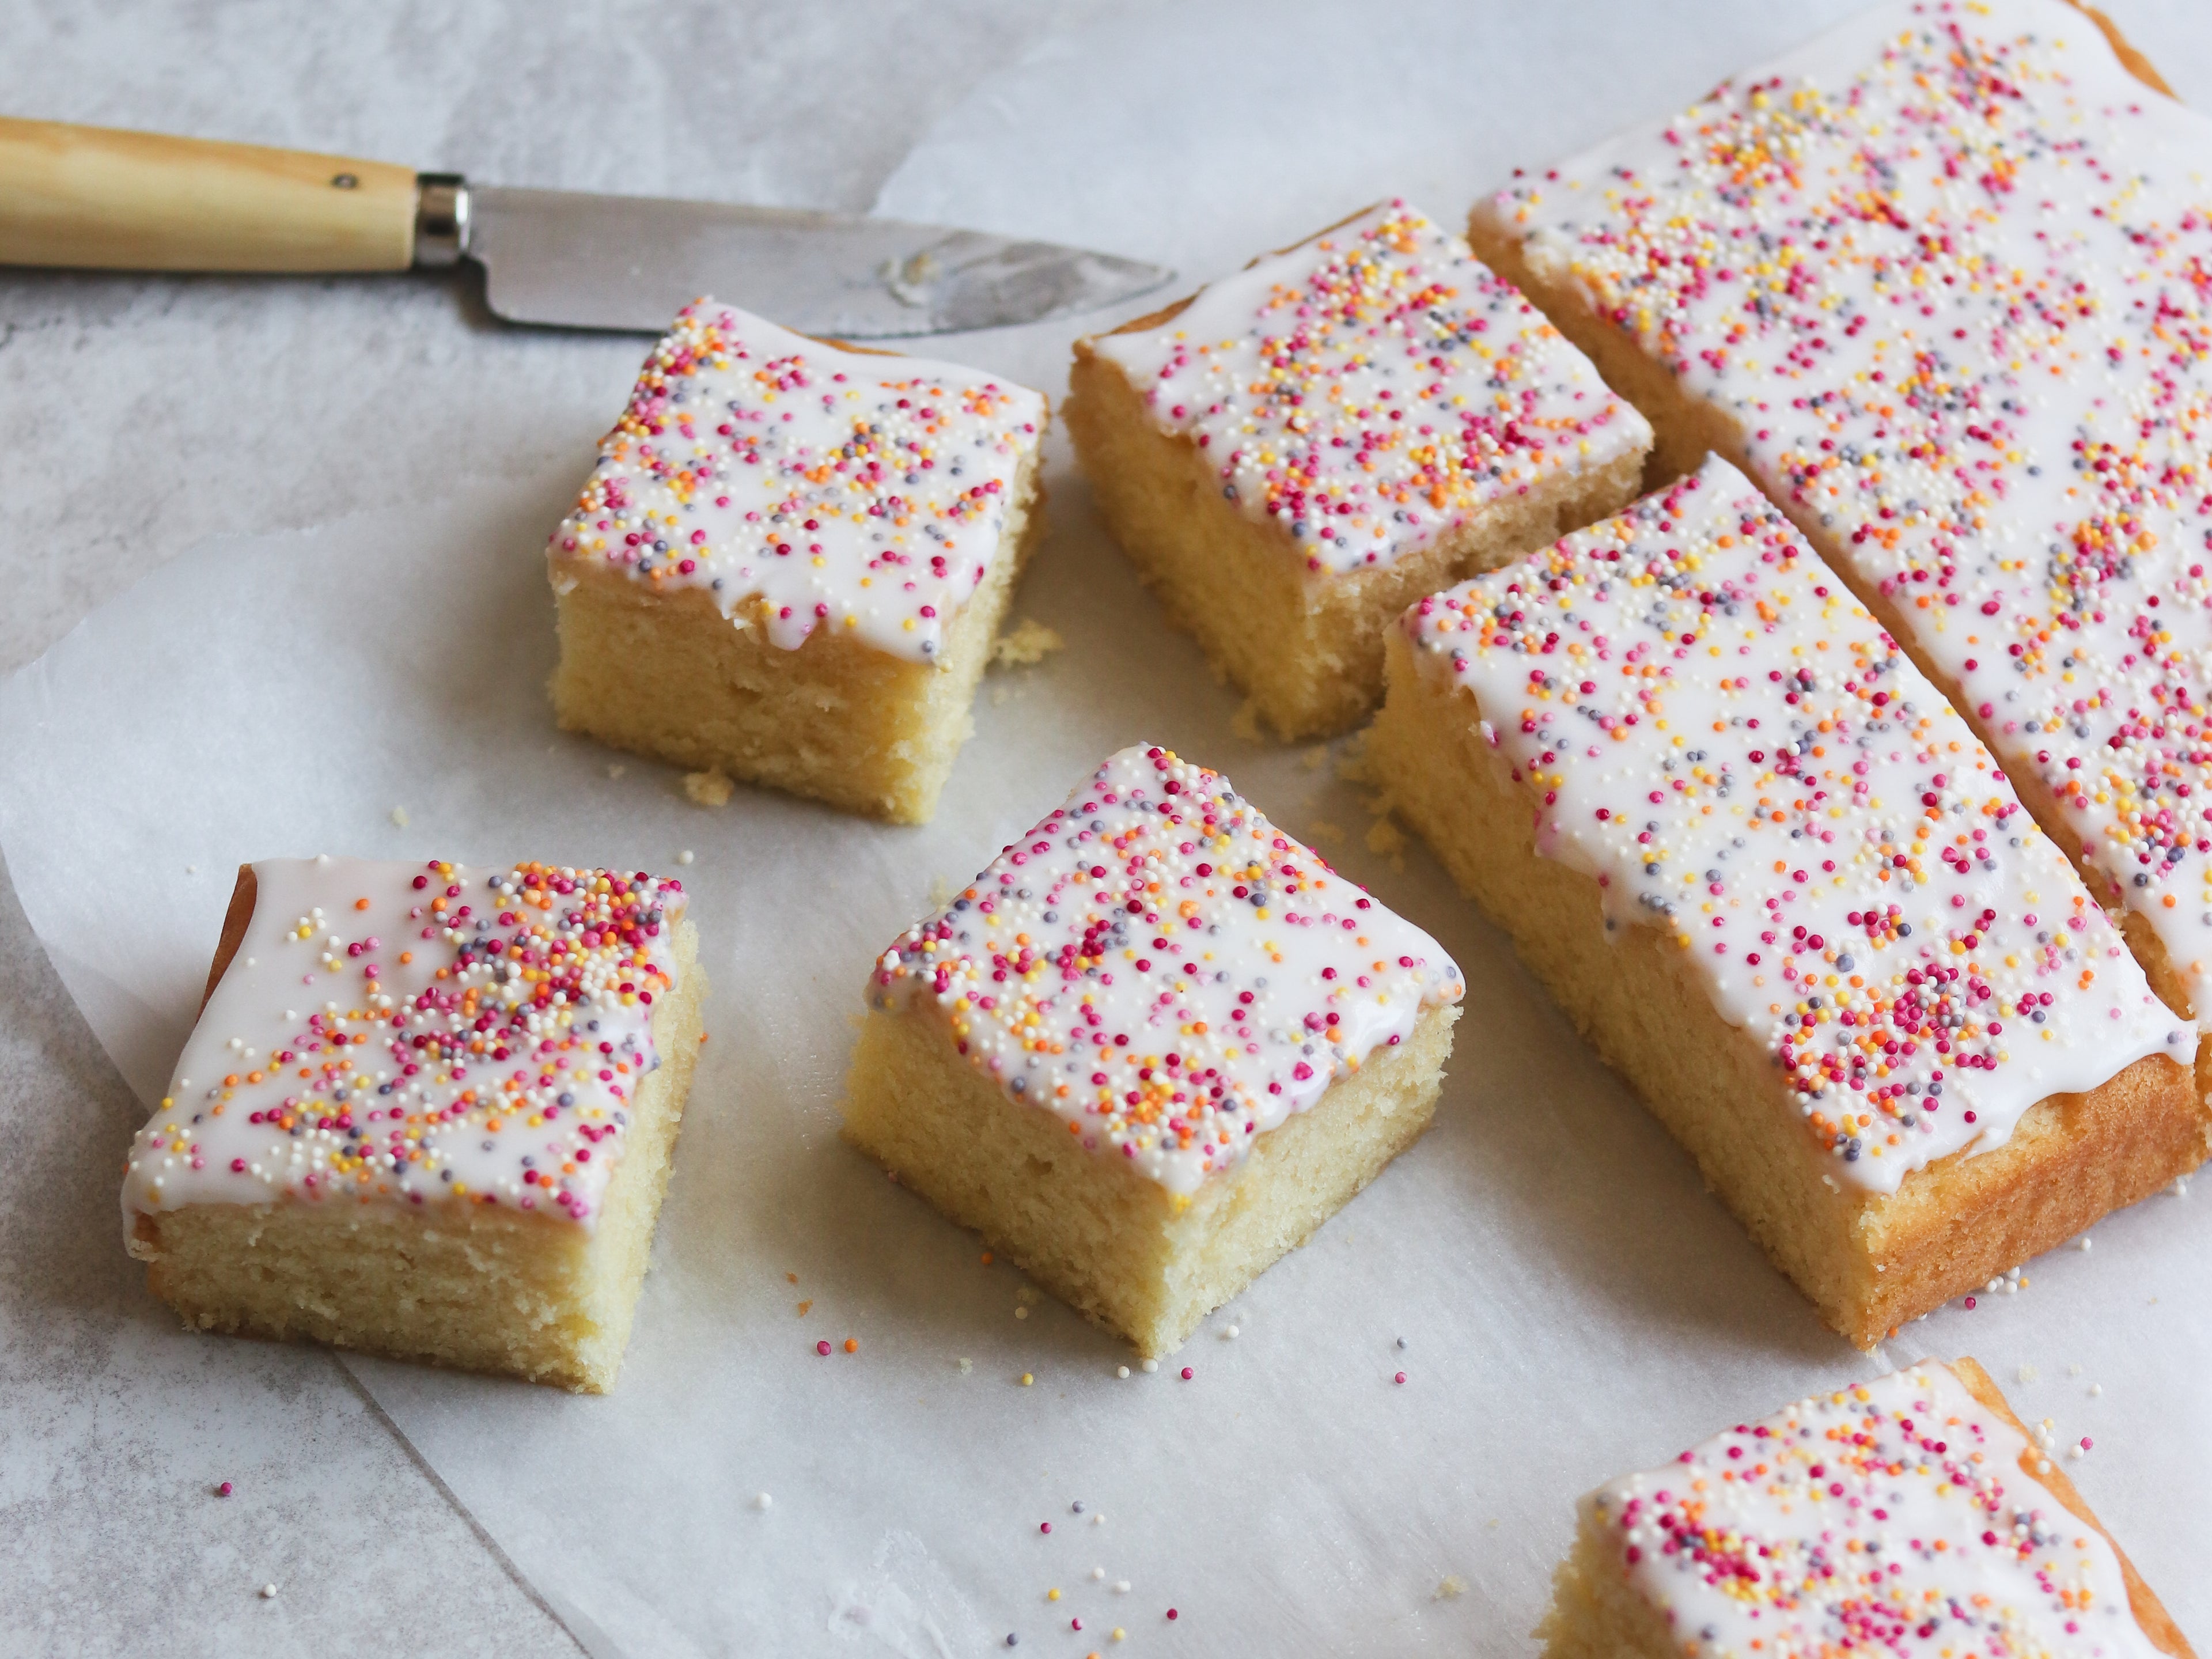 Sprinkle Cake sliced up on a sheet of baking paper, topped with icing and sprinkles